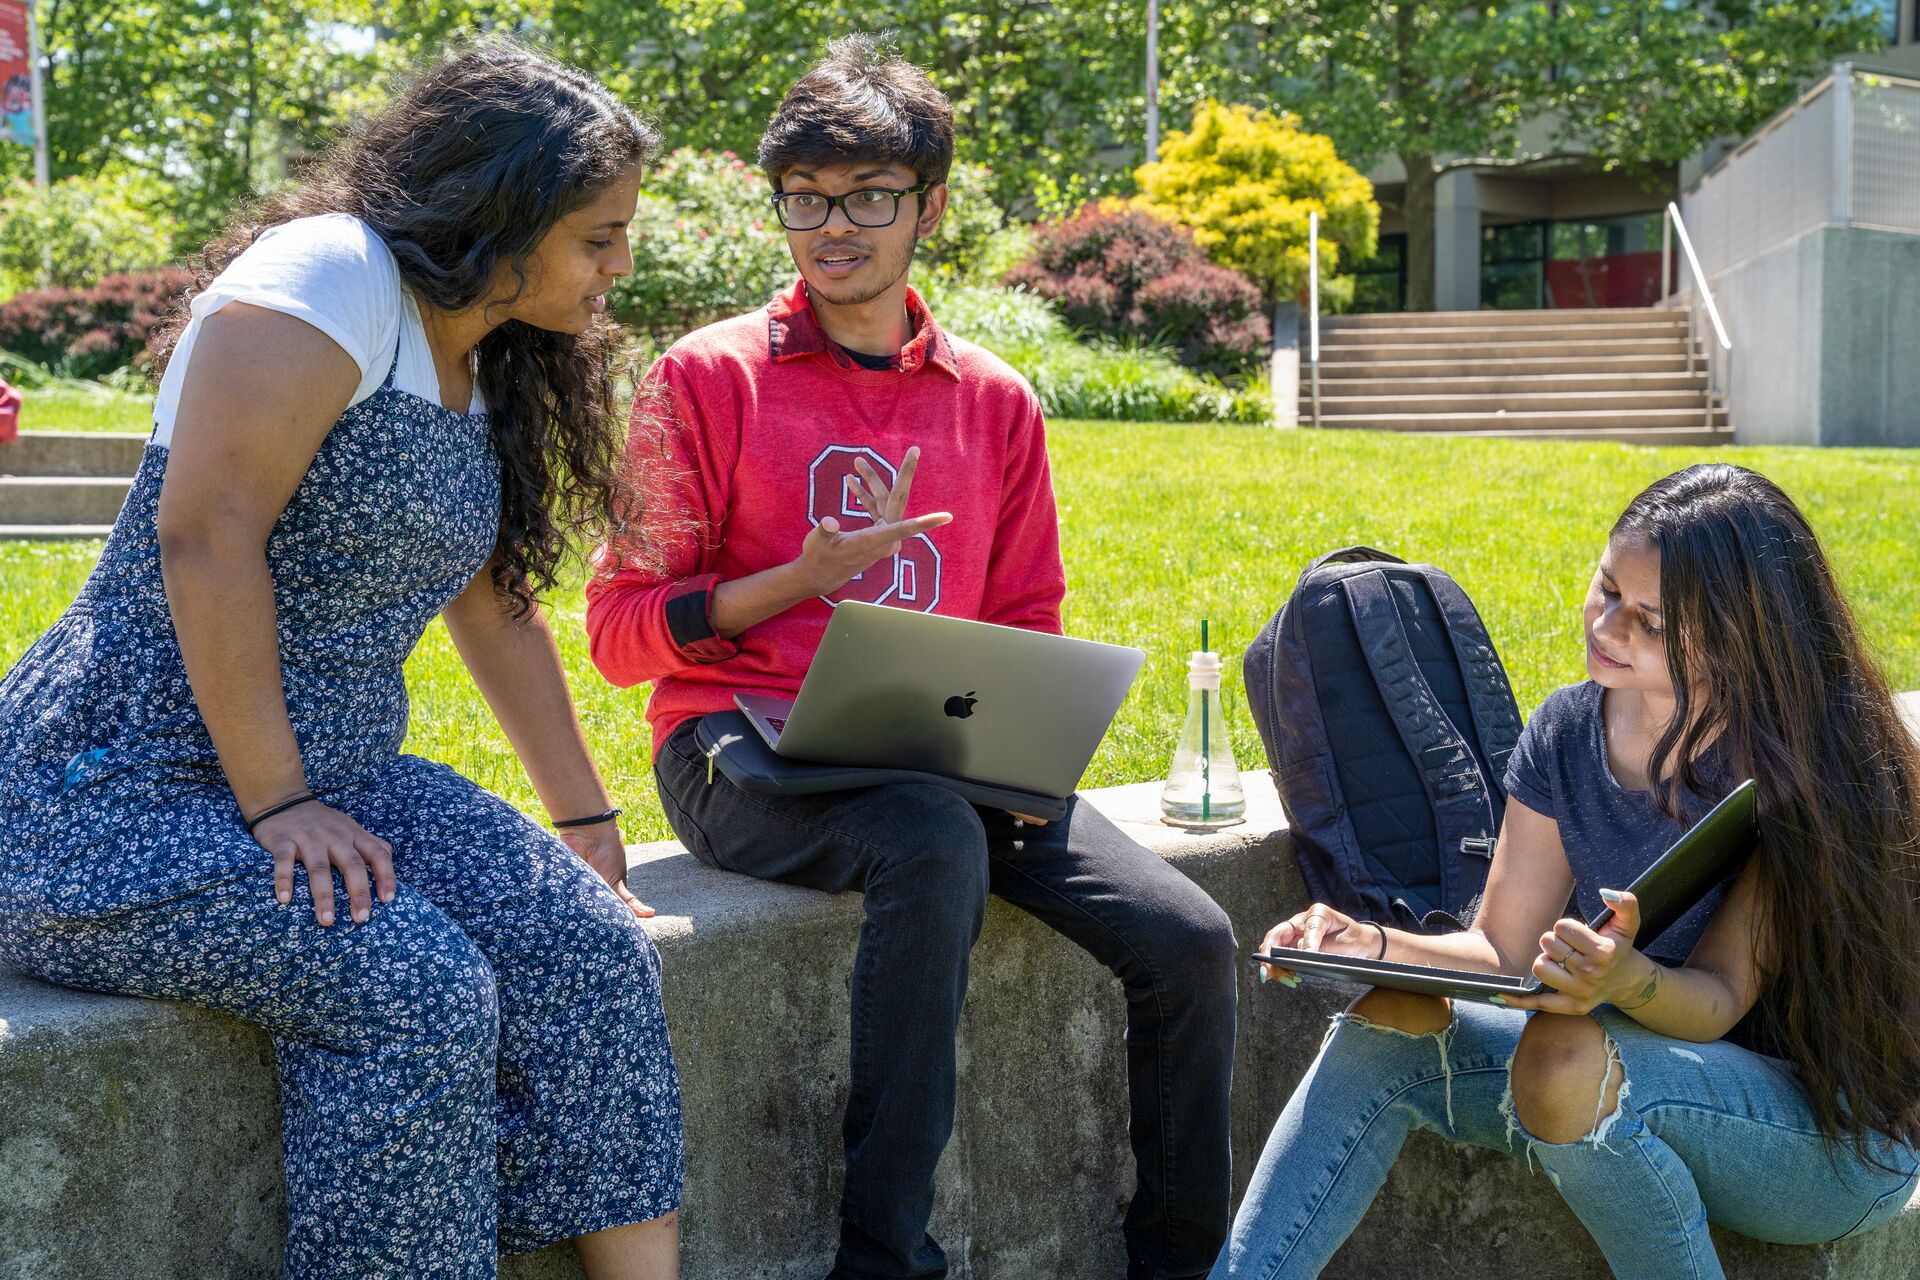 Students sitting and talking on campus